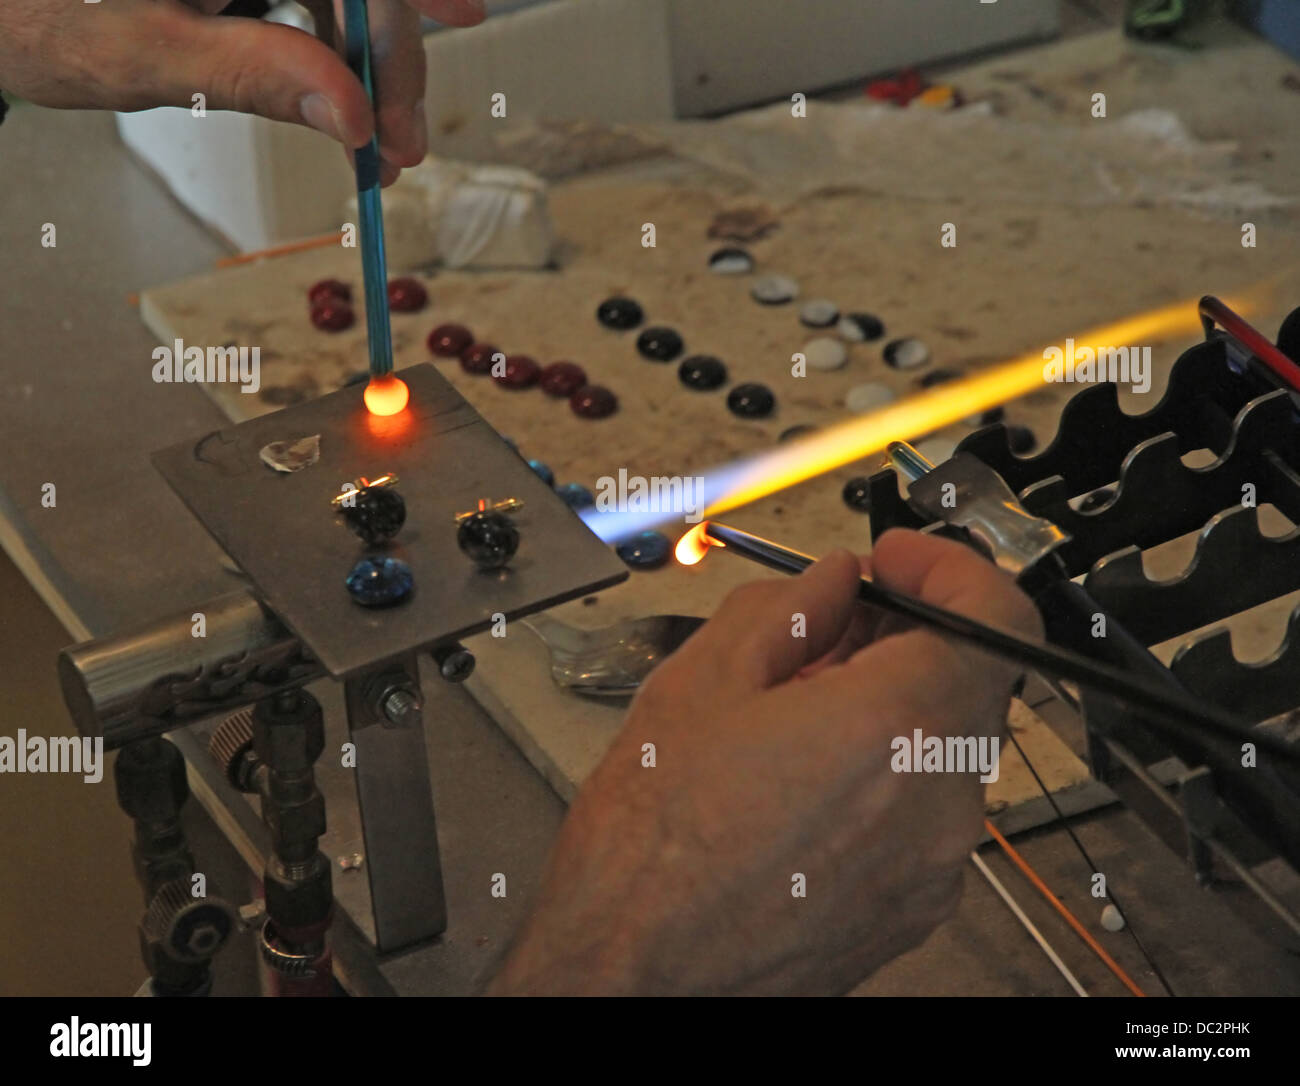 Glazier with gas torch lit while blending and shaping a piece of glass 3 Stock Photo